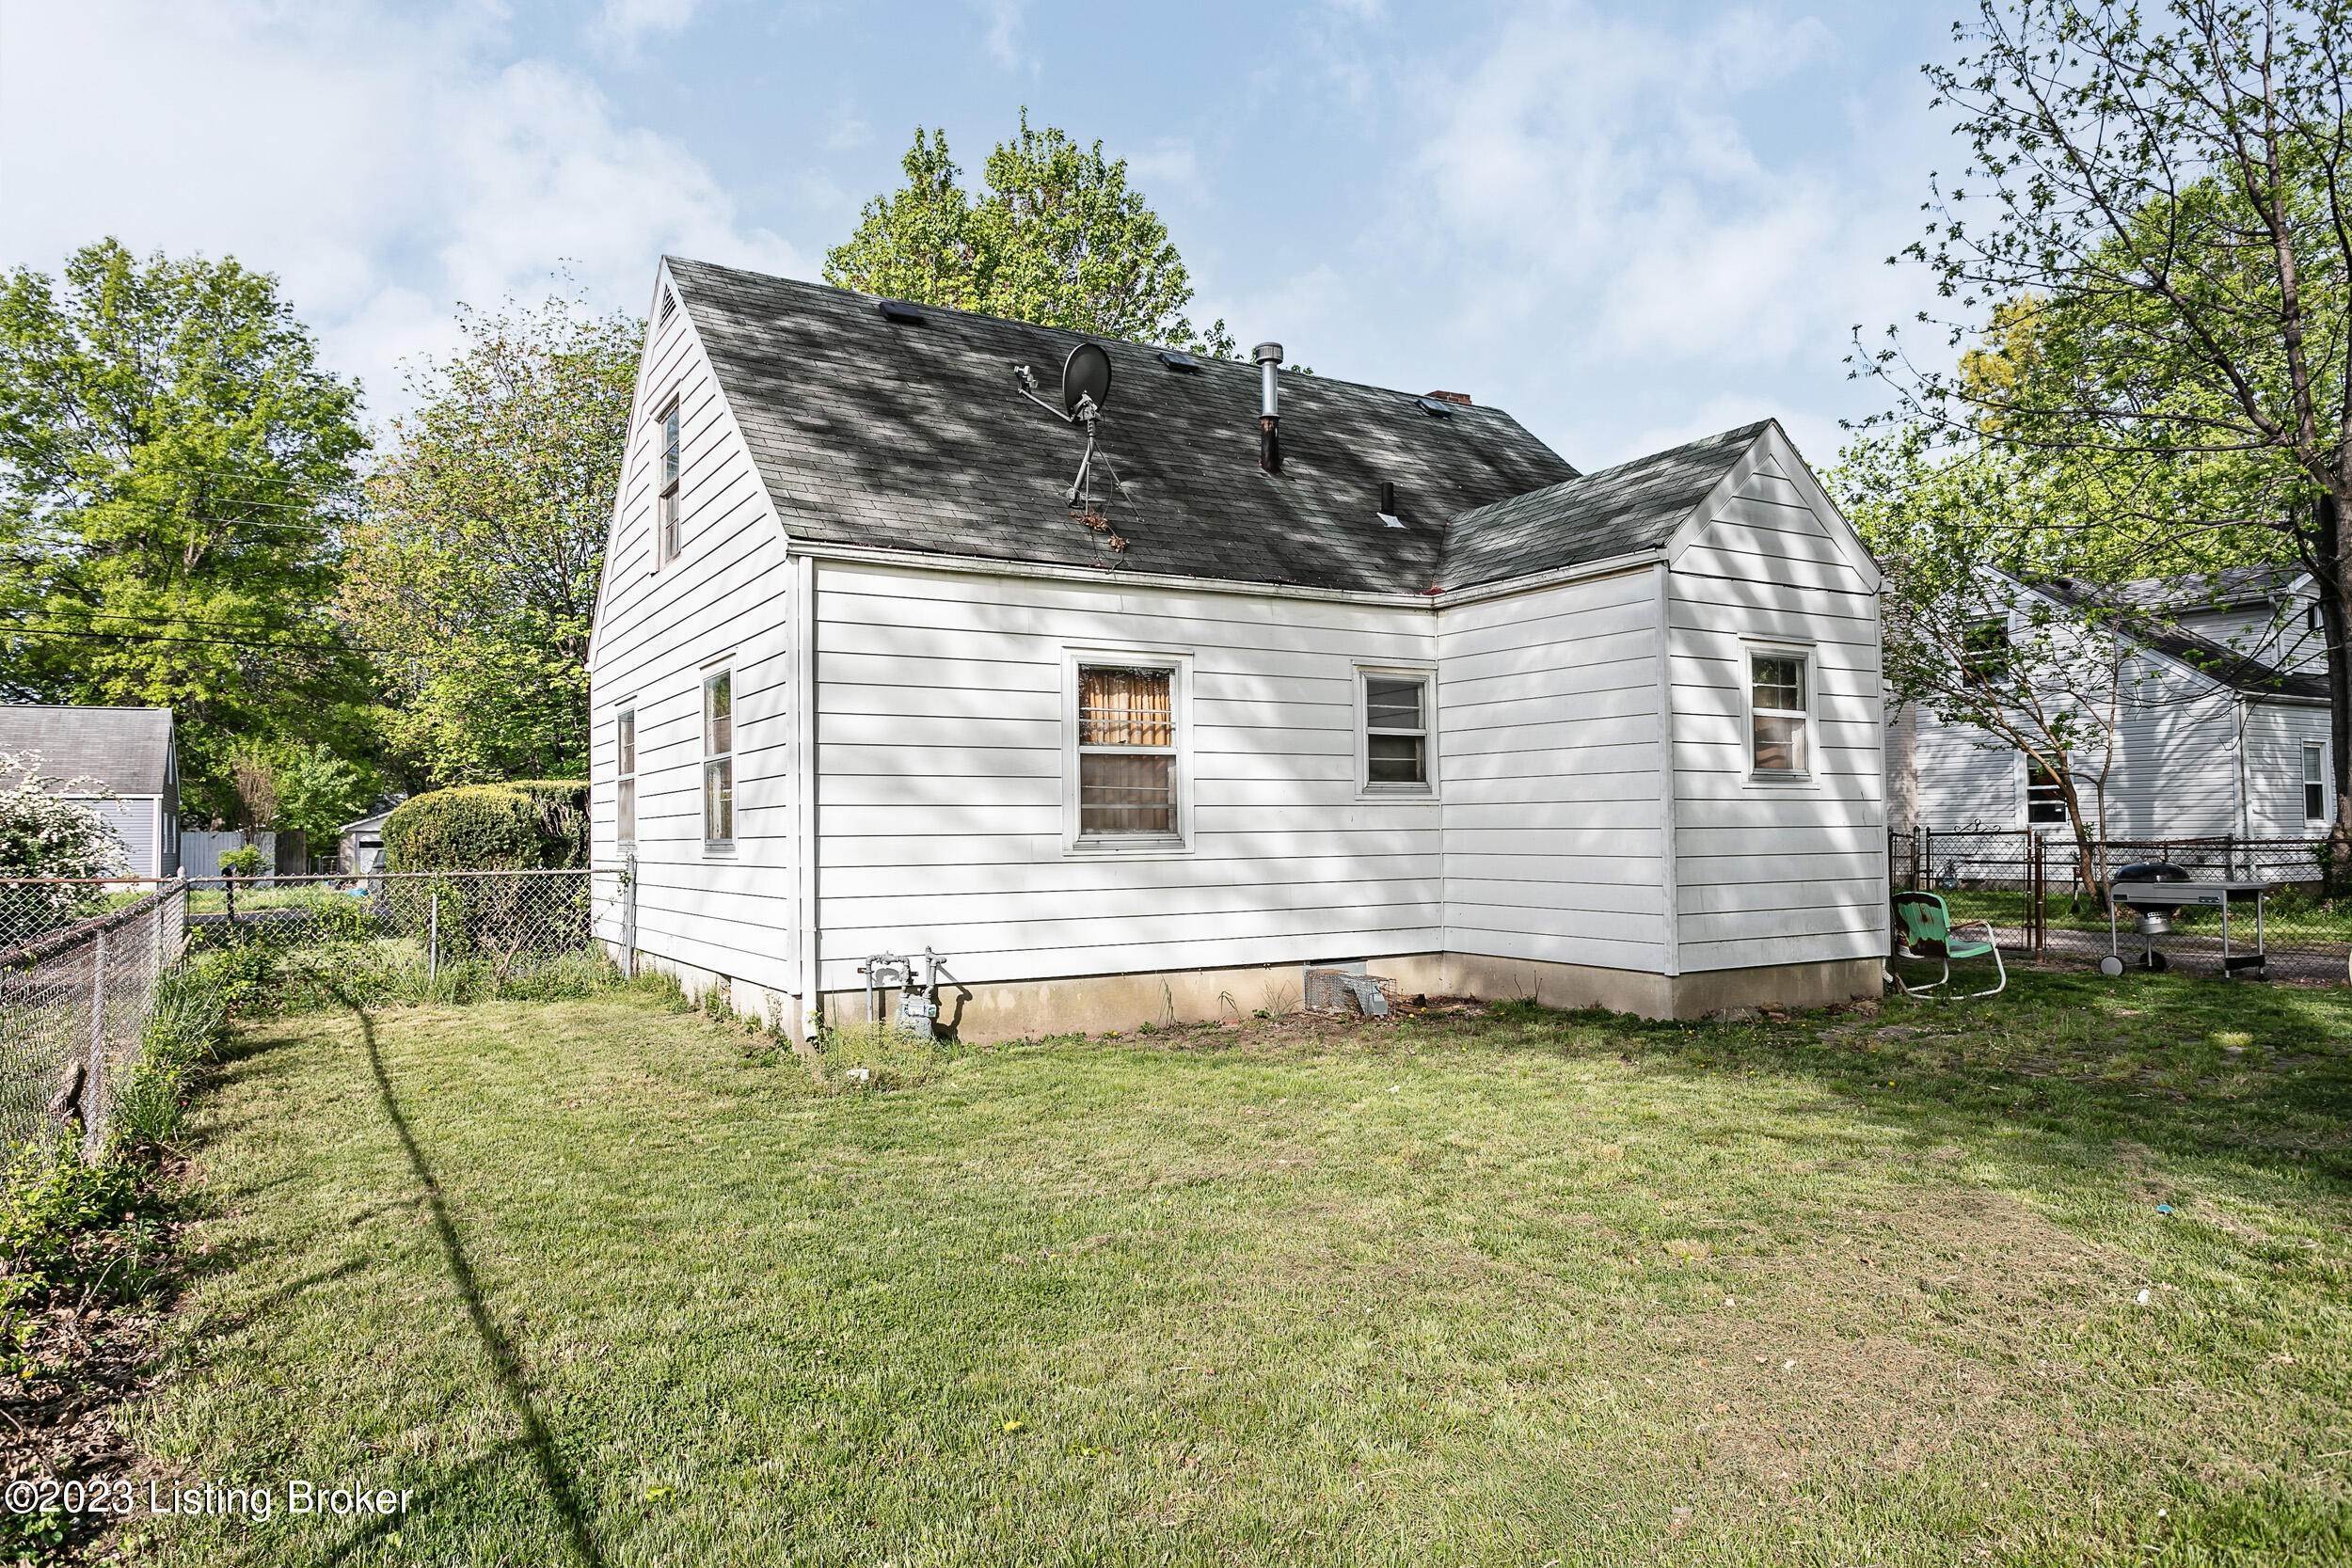 7. Single Family at Louisville, KY 40219